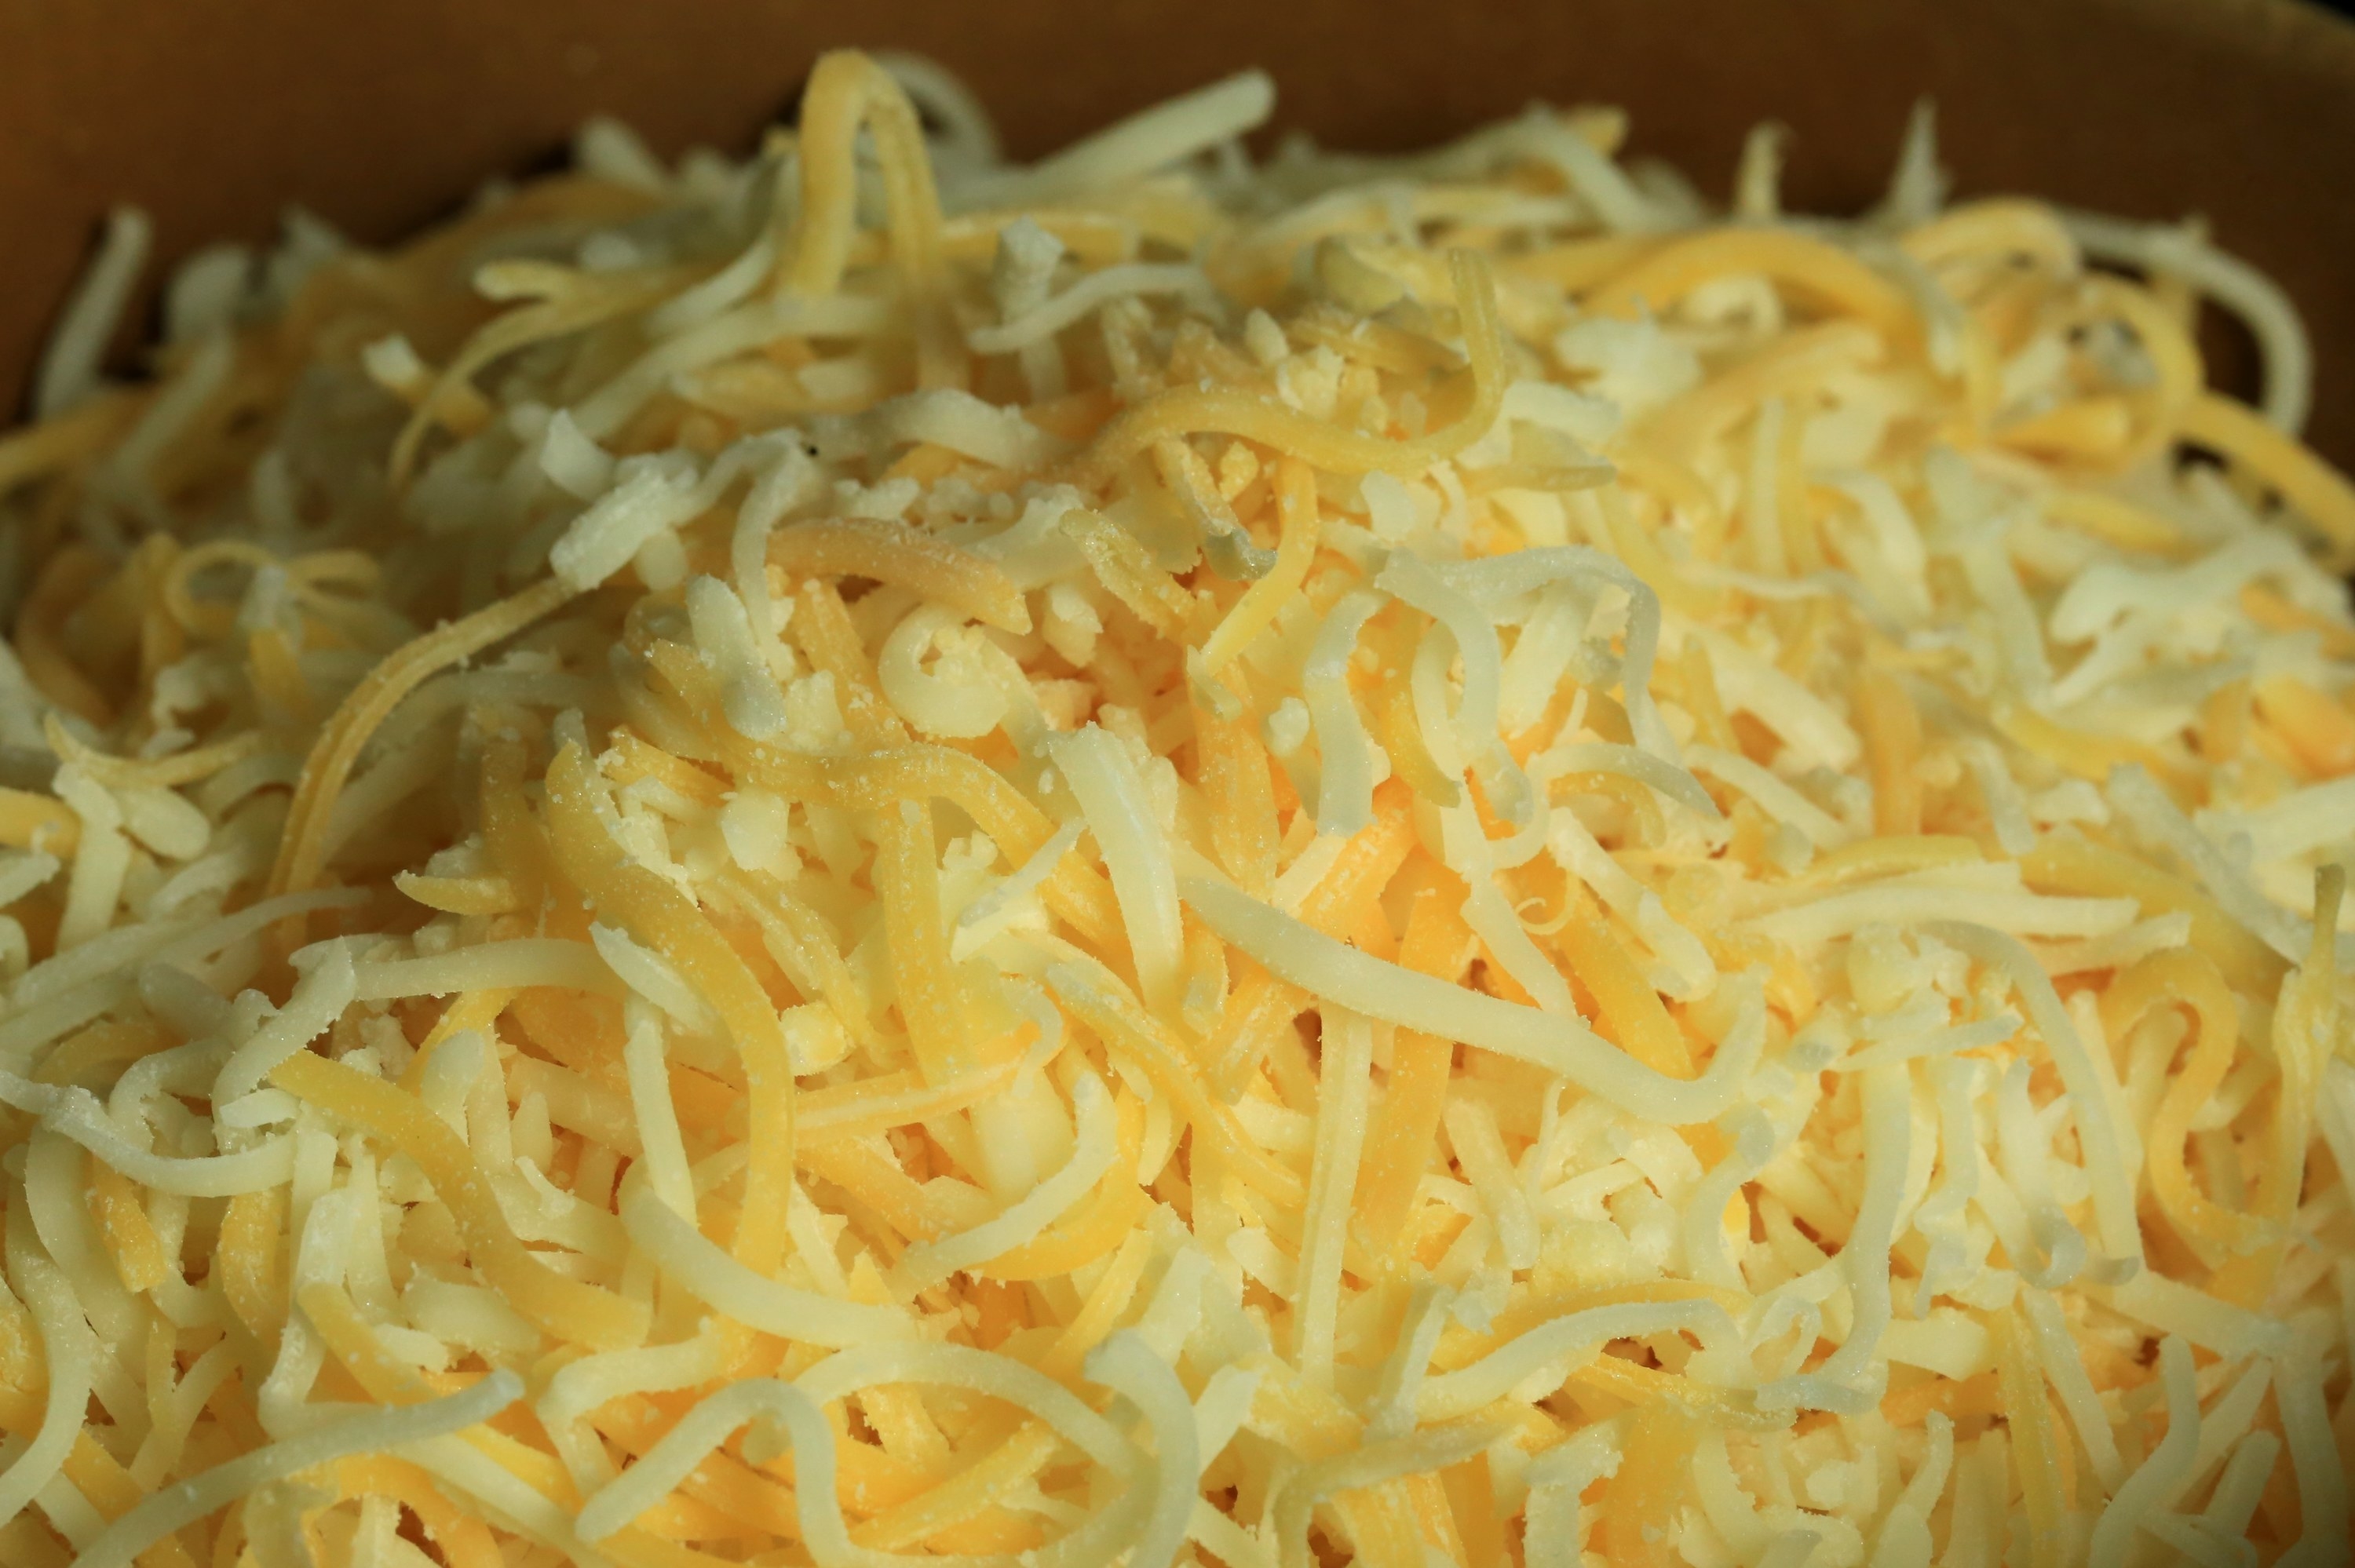 A pile of pre-shredded cheese